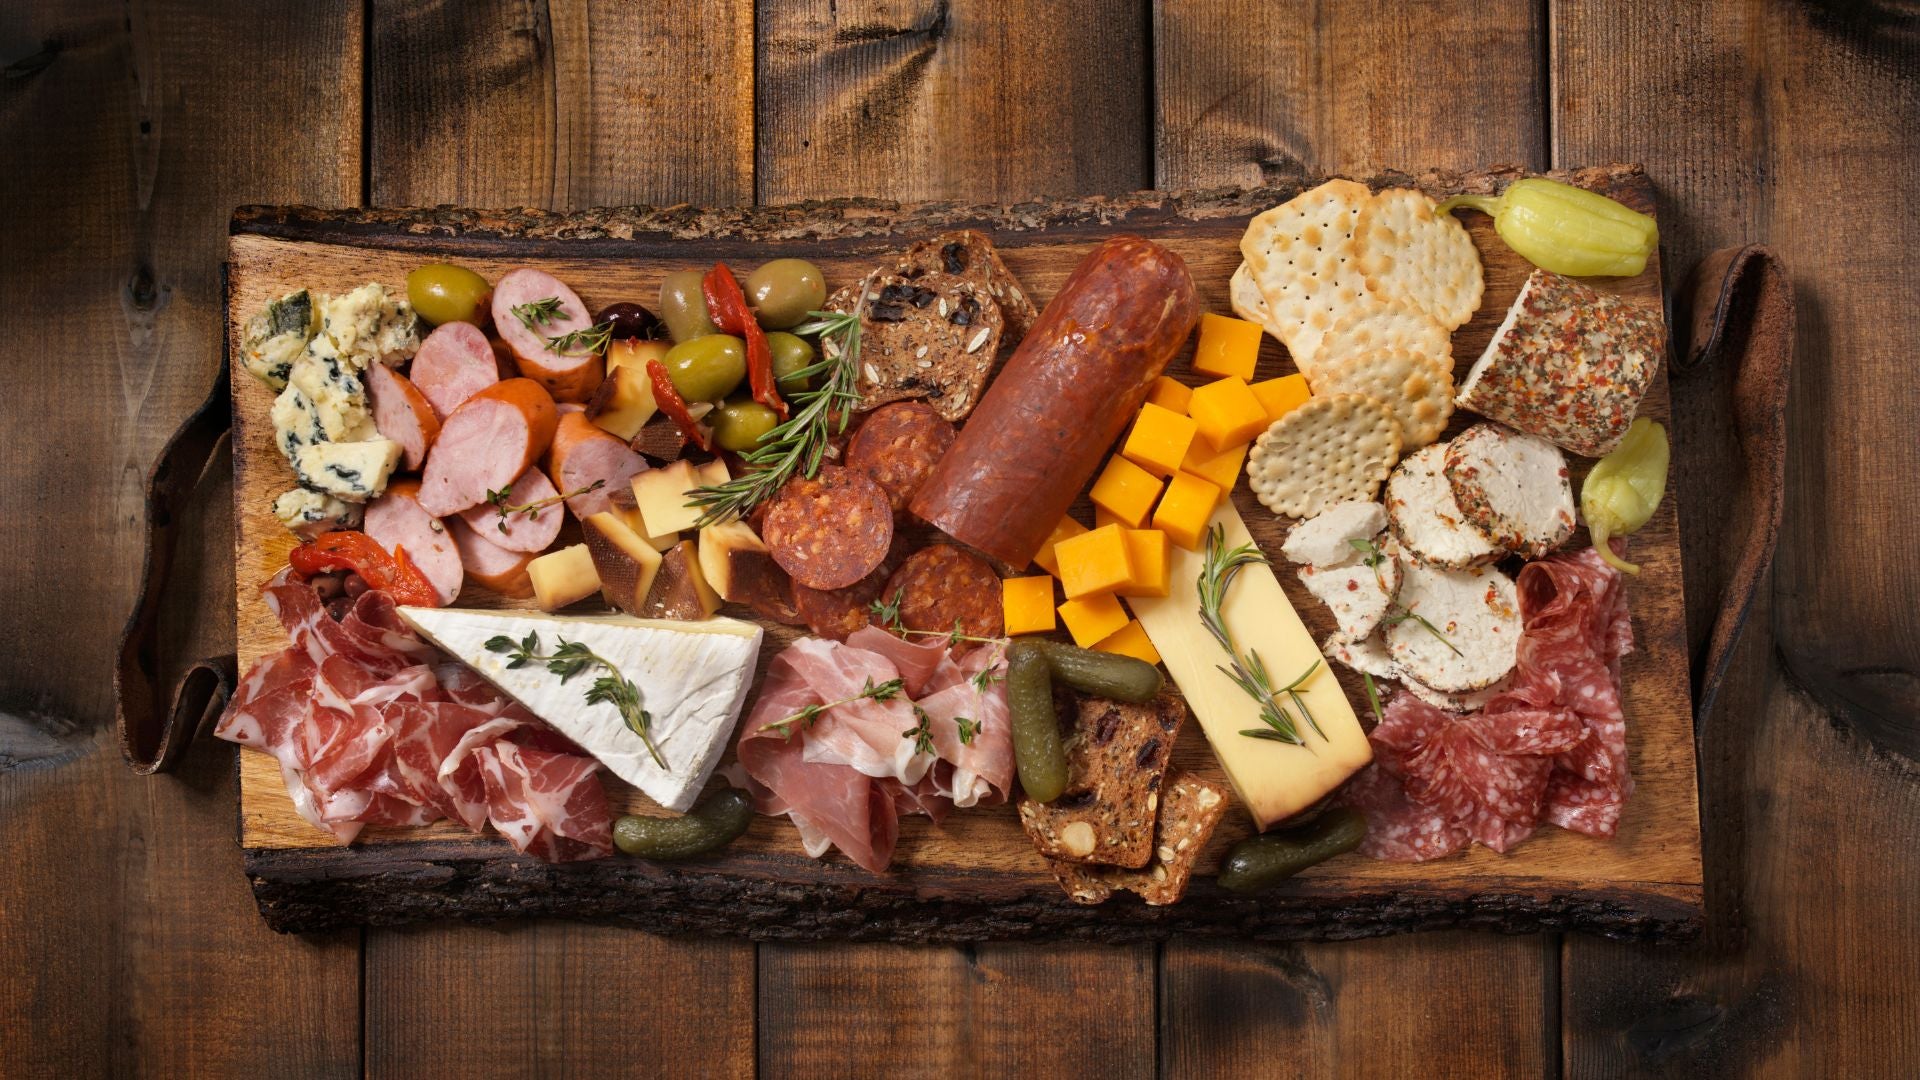 8 Things You Need to Craft a Great Charcuterie Board